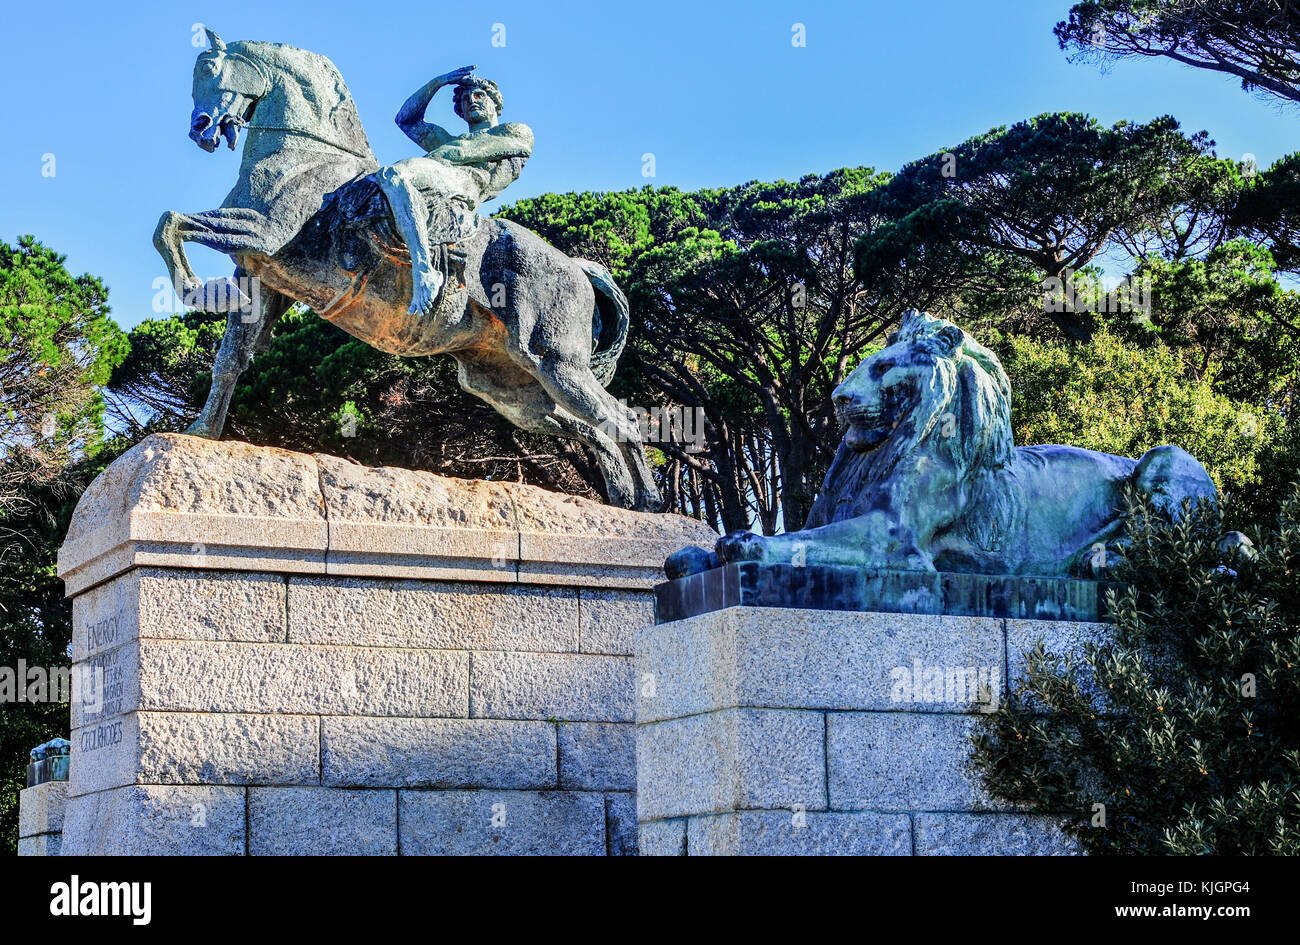 Cape Town, South Africa - March 25, 2012: The Rhodes Memorial monument in Cape Town, South Africa, on Table Mountain, to the honor of Cecil John Rhode Stock Photo